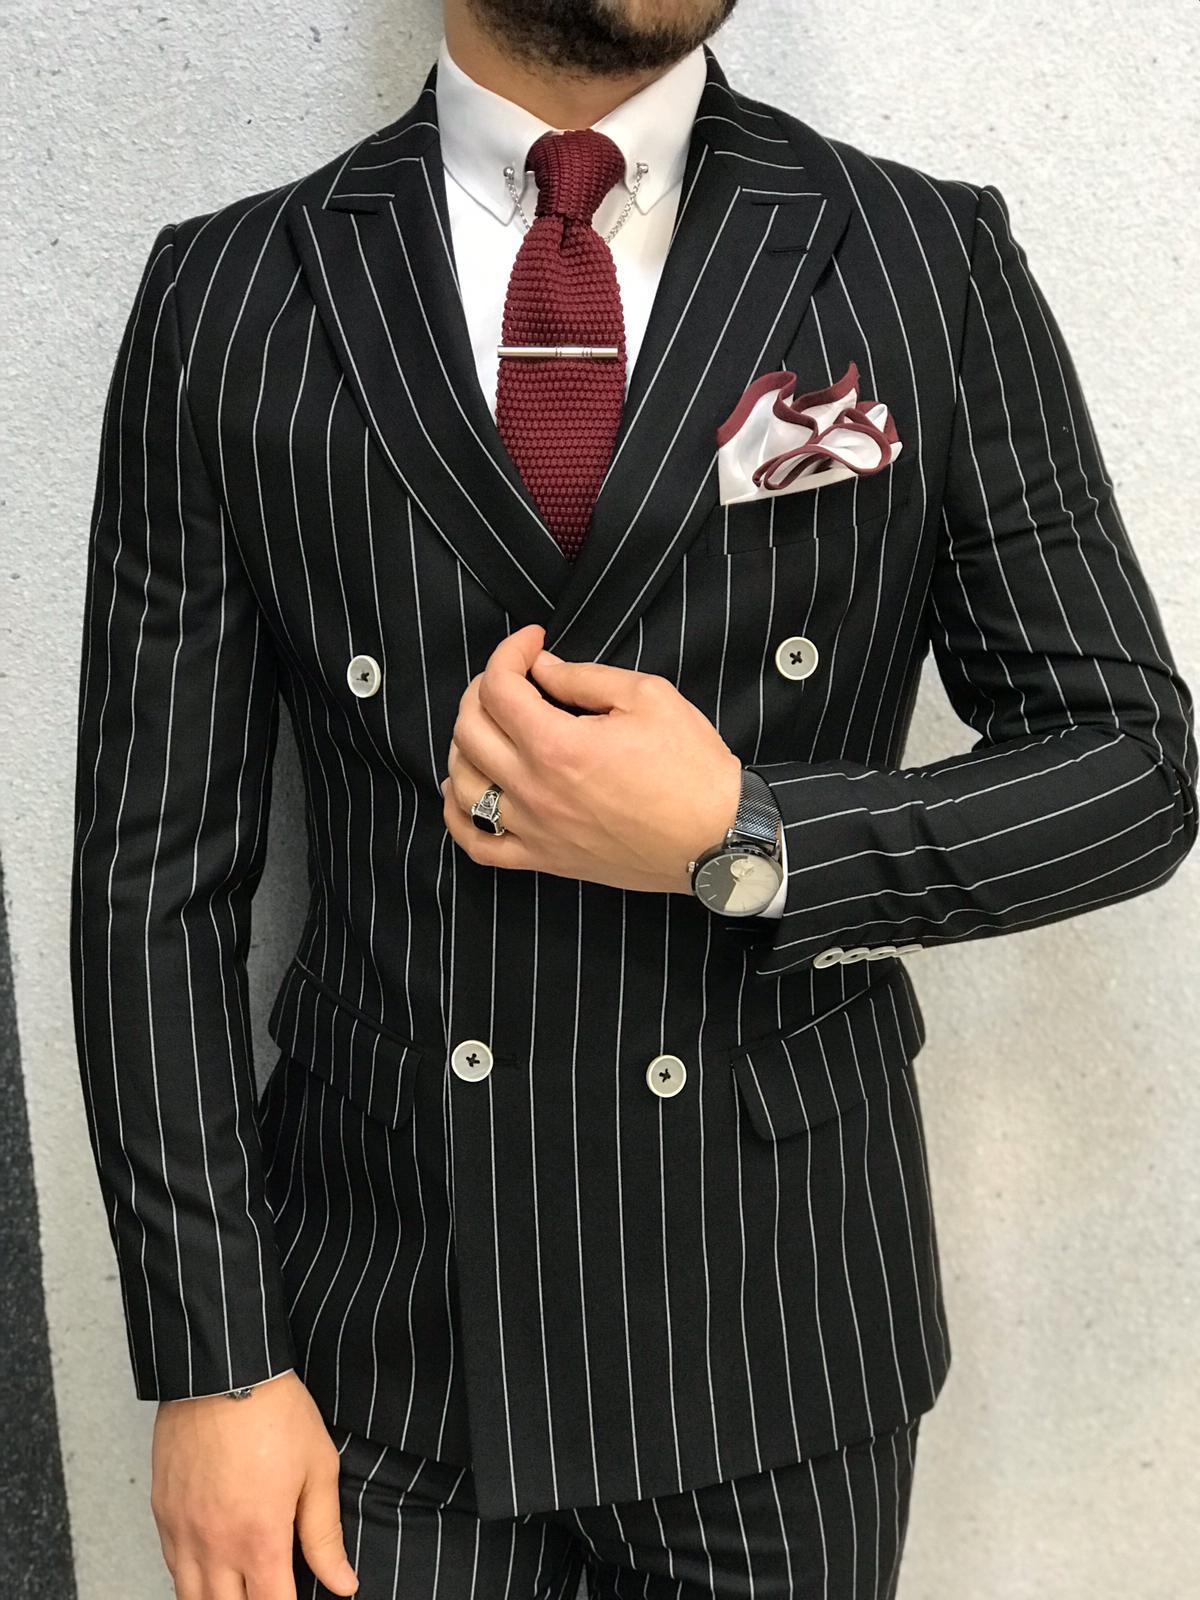 black and white striped suit mens